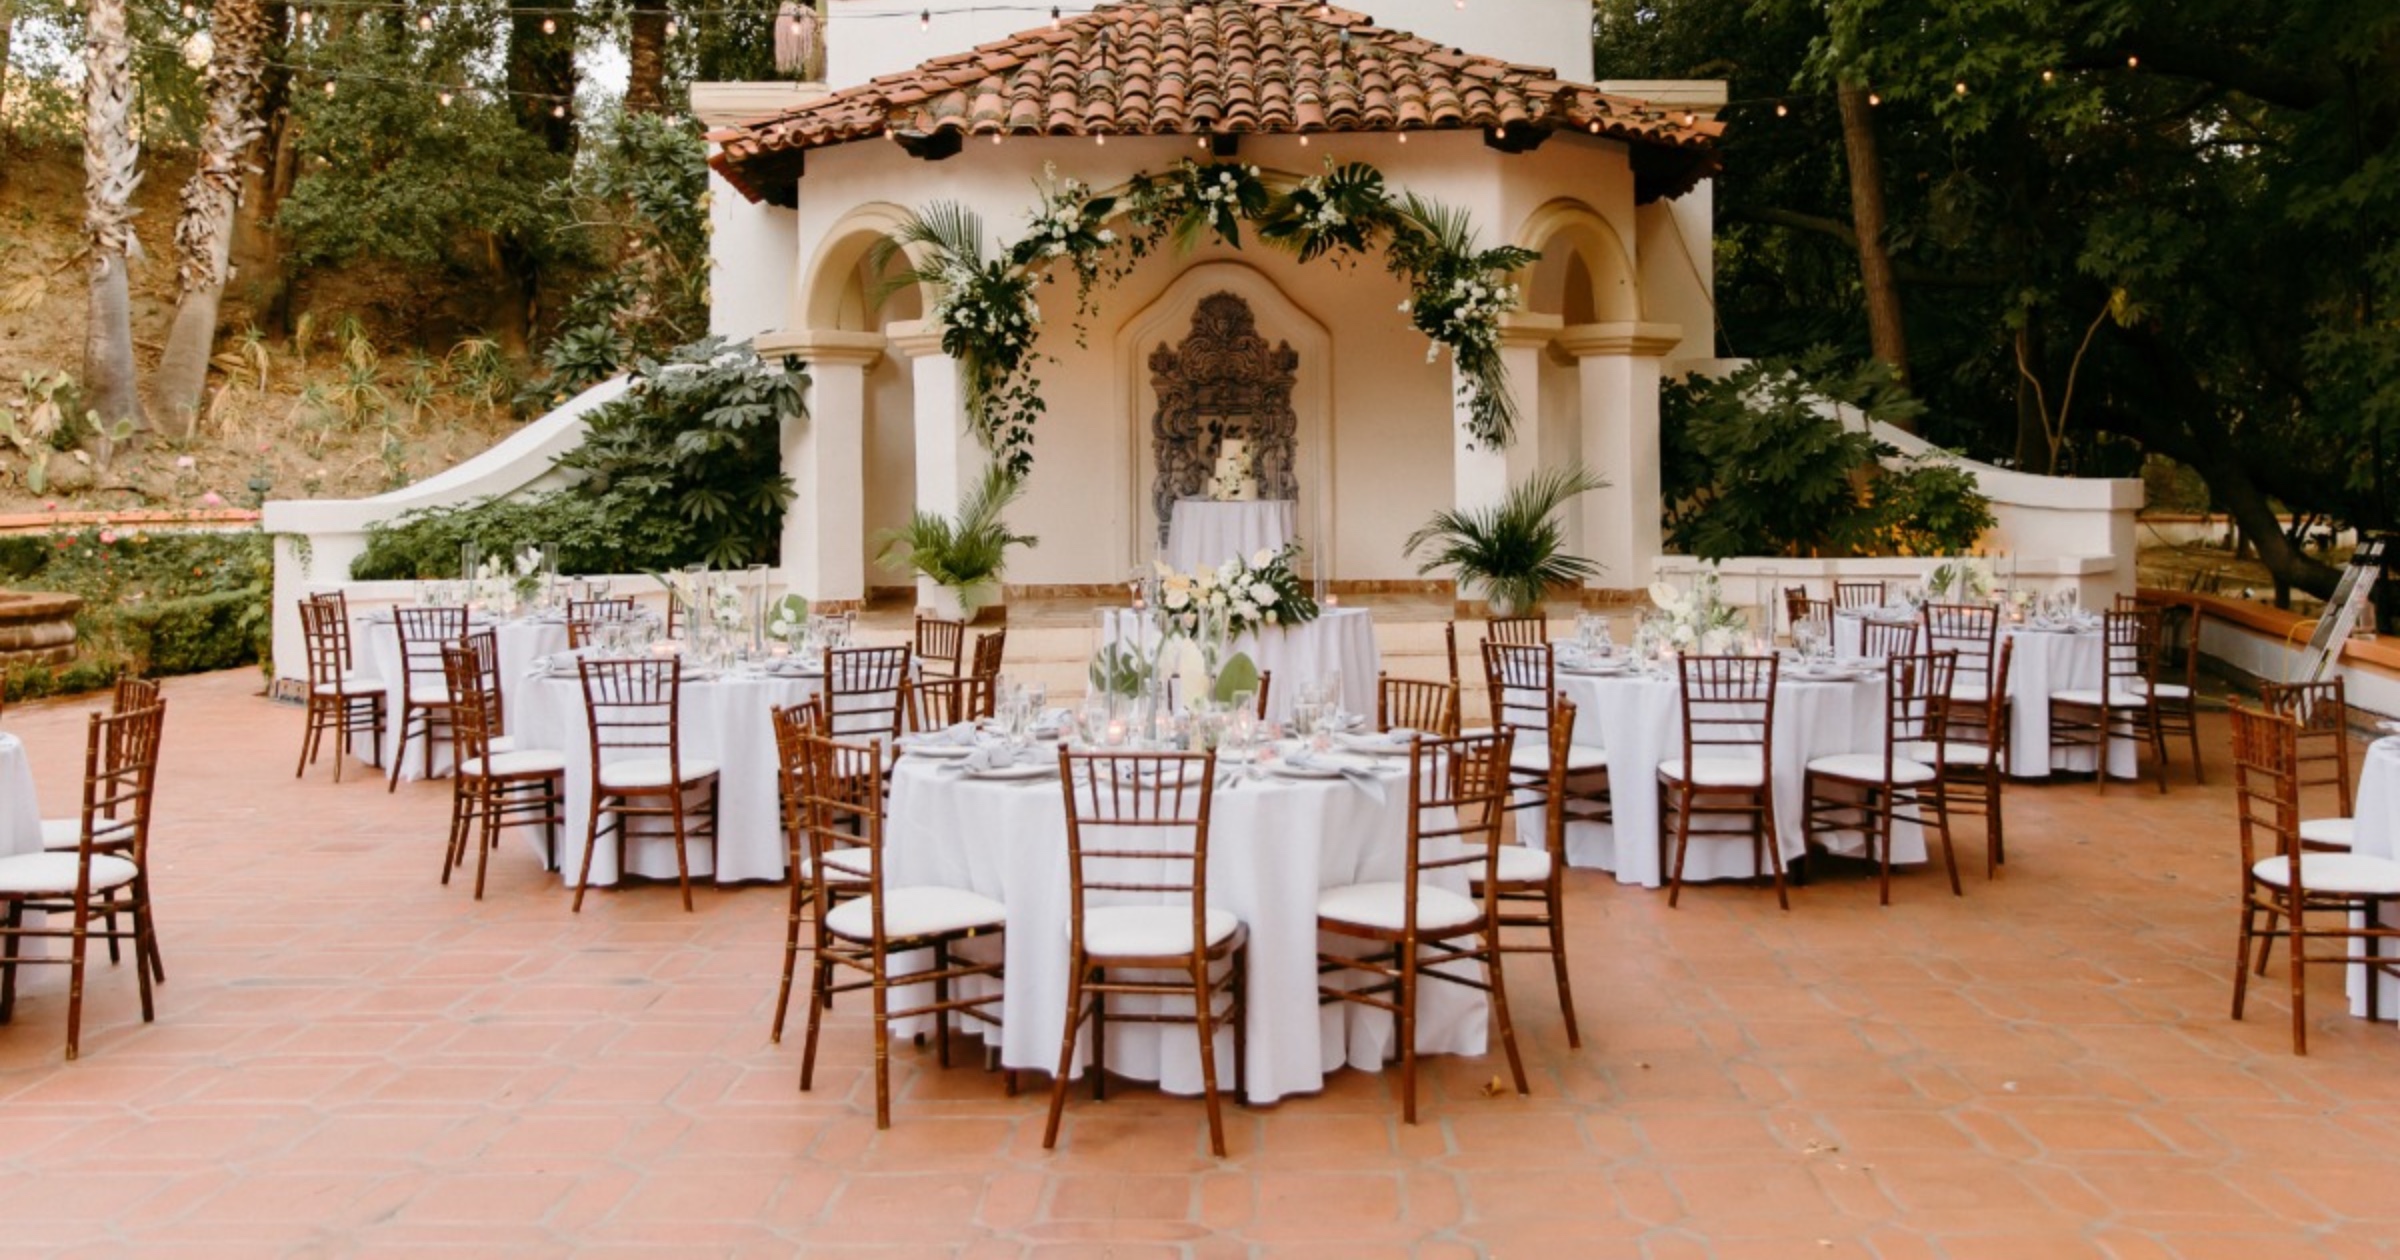 A Chic Outdoor Multicultural Wedding in California